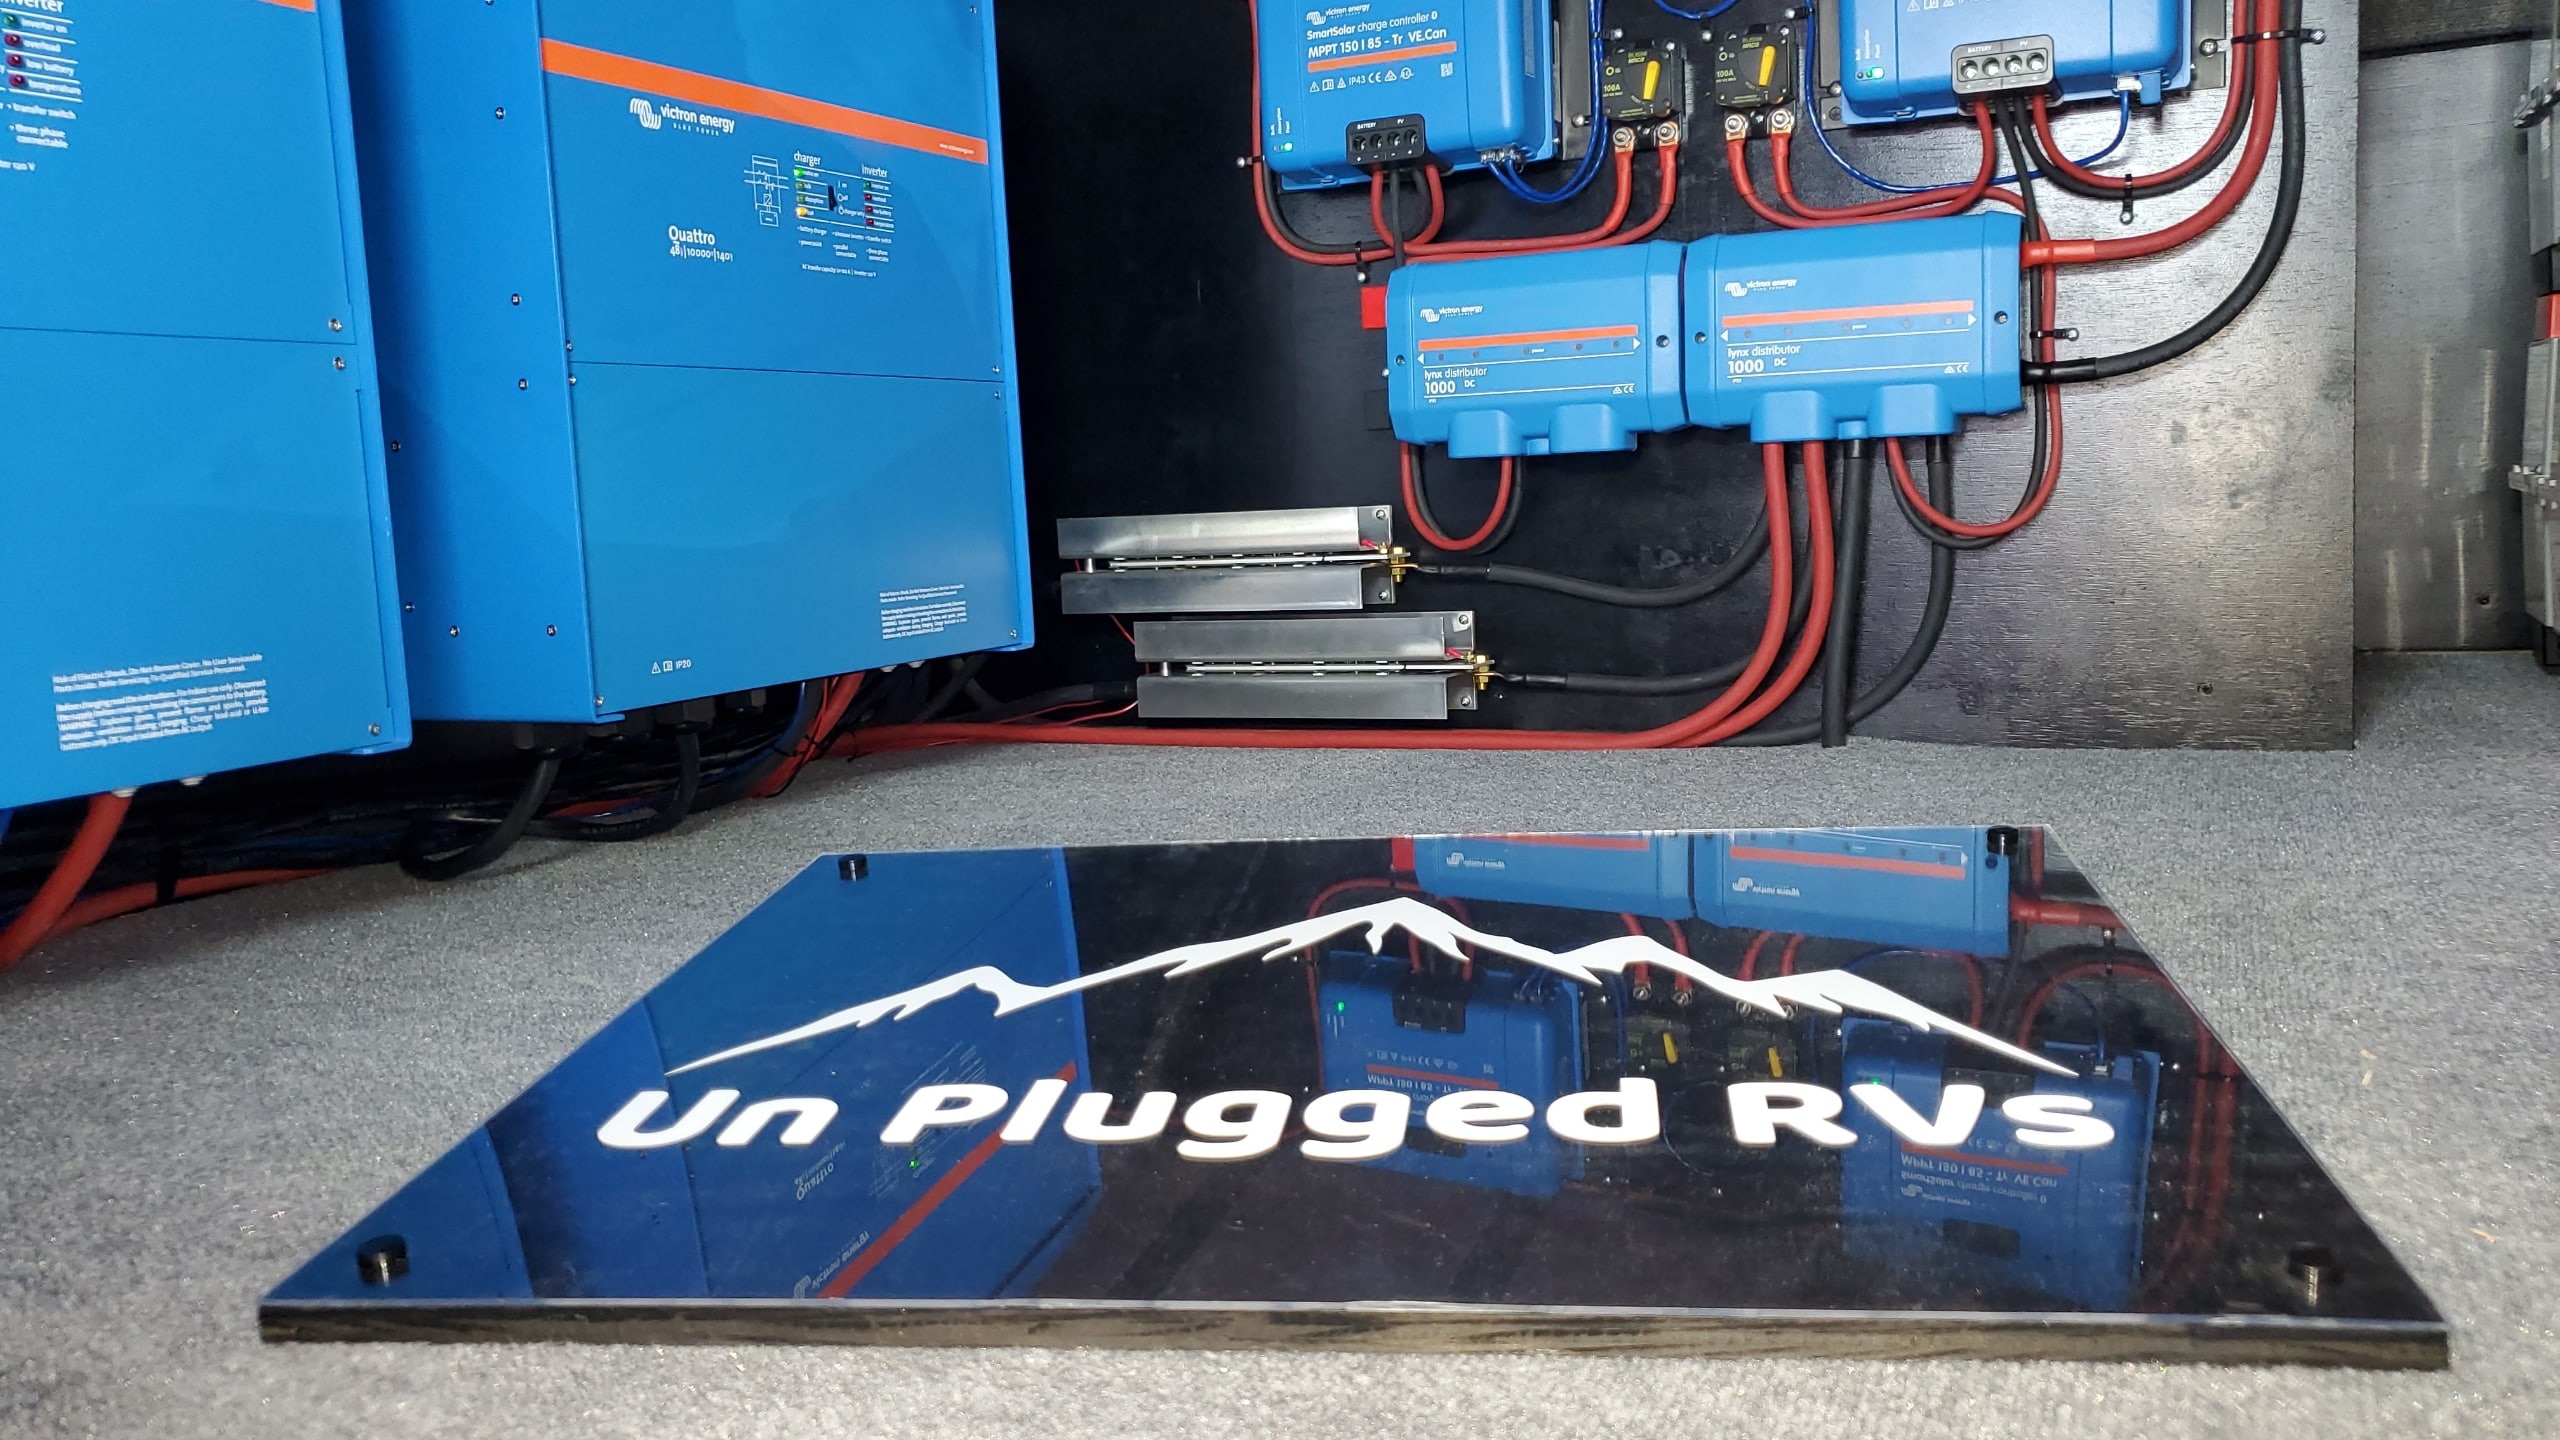 Battle Born Batteries and Unplugged RVS work together taking steps to create a sustainable future.